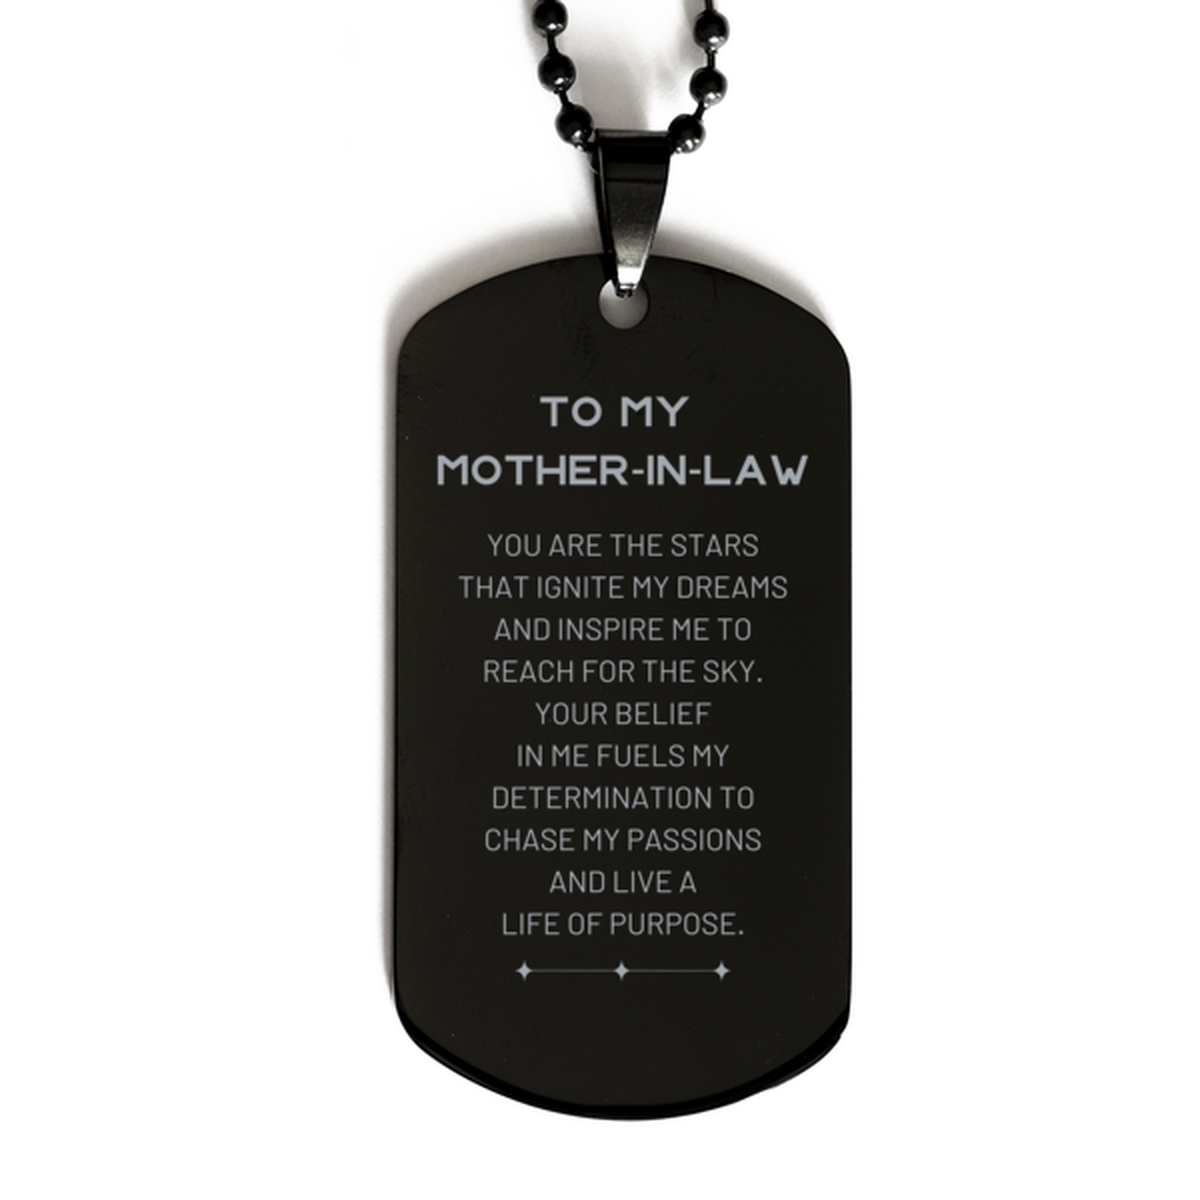 To My Mother-In-Law Black Dog Tag, You are the stars that ignite my dreams and inspire me to reach for the sky, Birthday Unique Gifts For Mother-In-Law, Thank You Gifts For Mother-In-Law